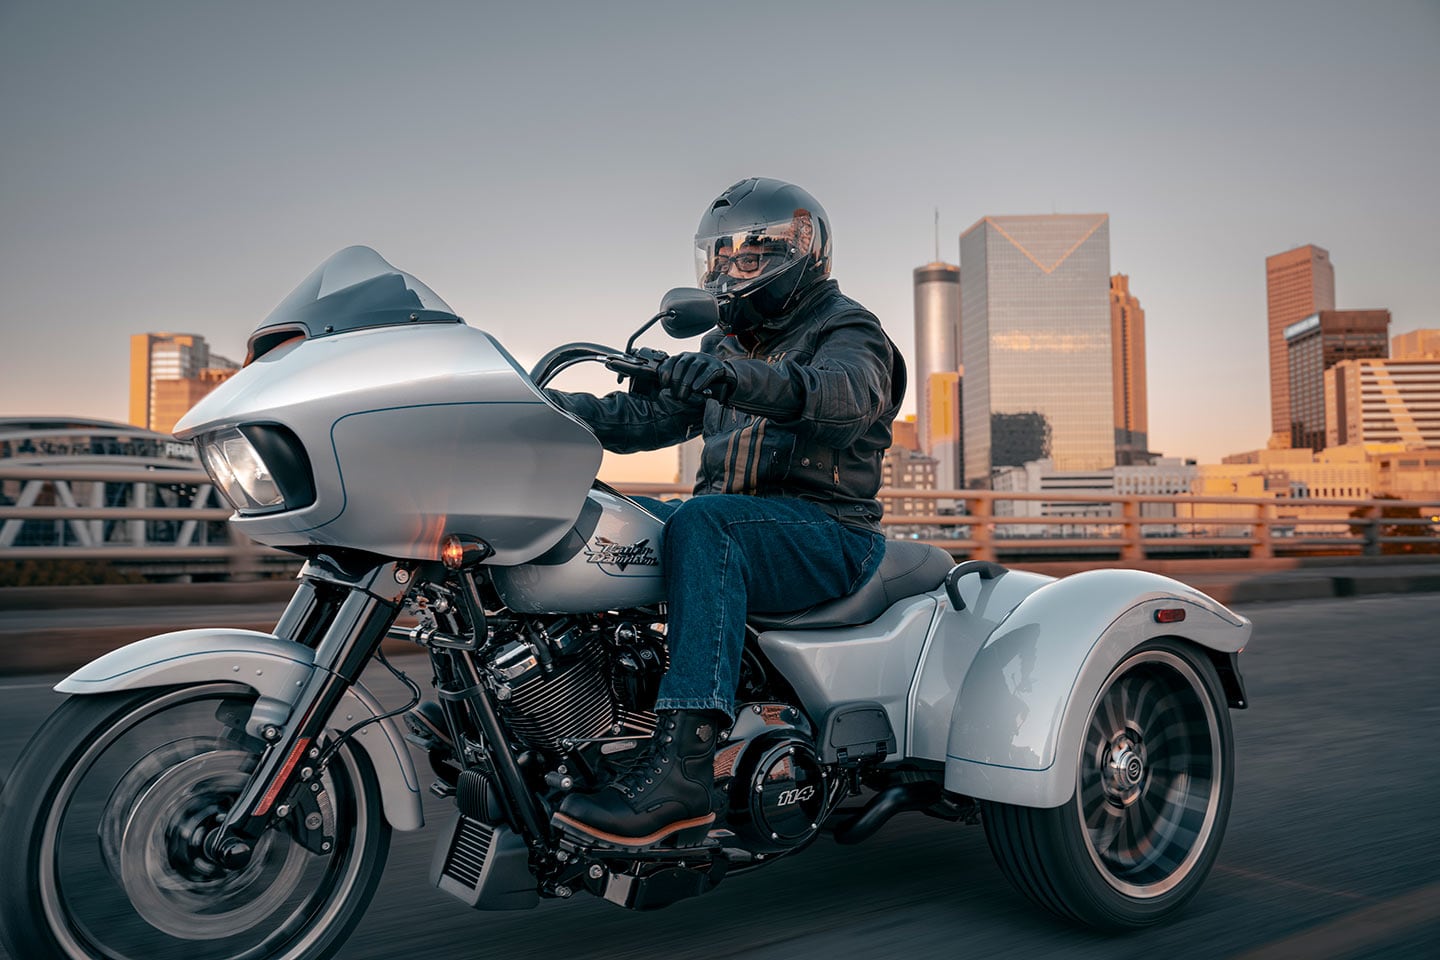 The Road Glide 3 in Atlas Silver Metallic ($1,000 extra). With feet-forward ergos and generous wind protection—not to mention a trunk—the Road Glide 3 is ready for you to rack up some miles.